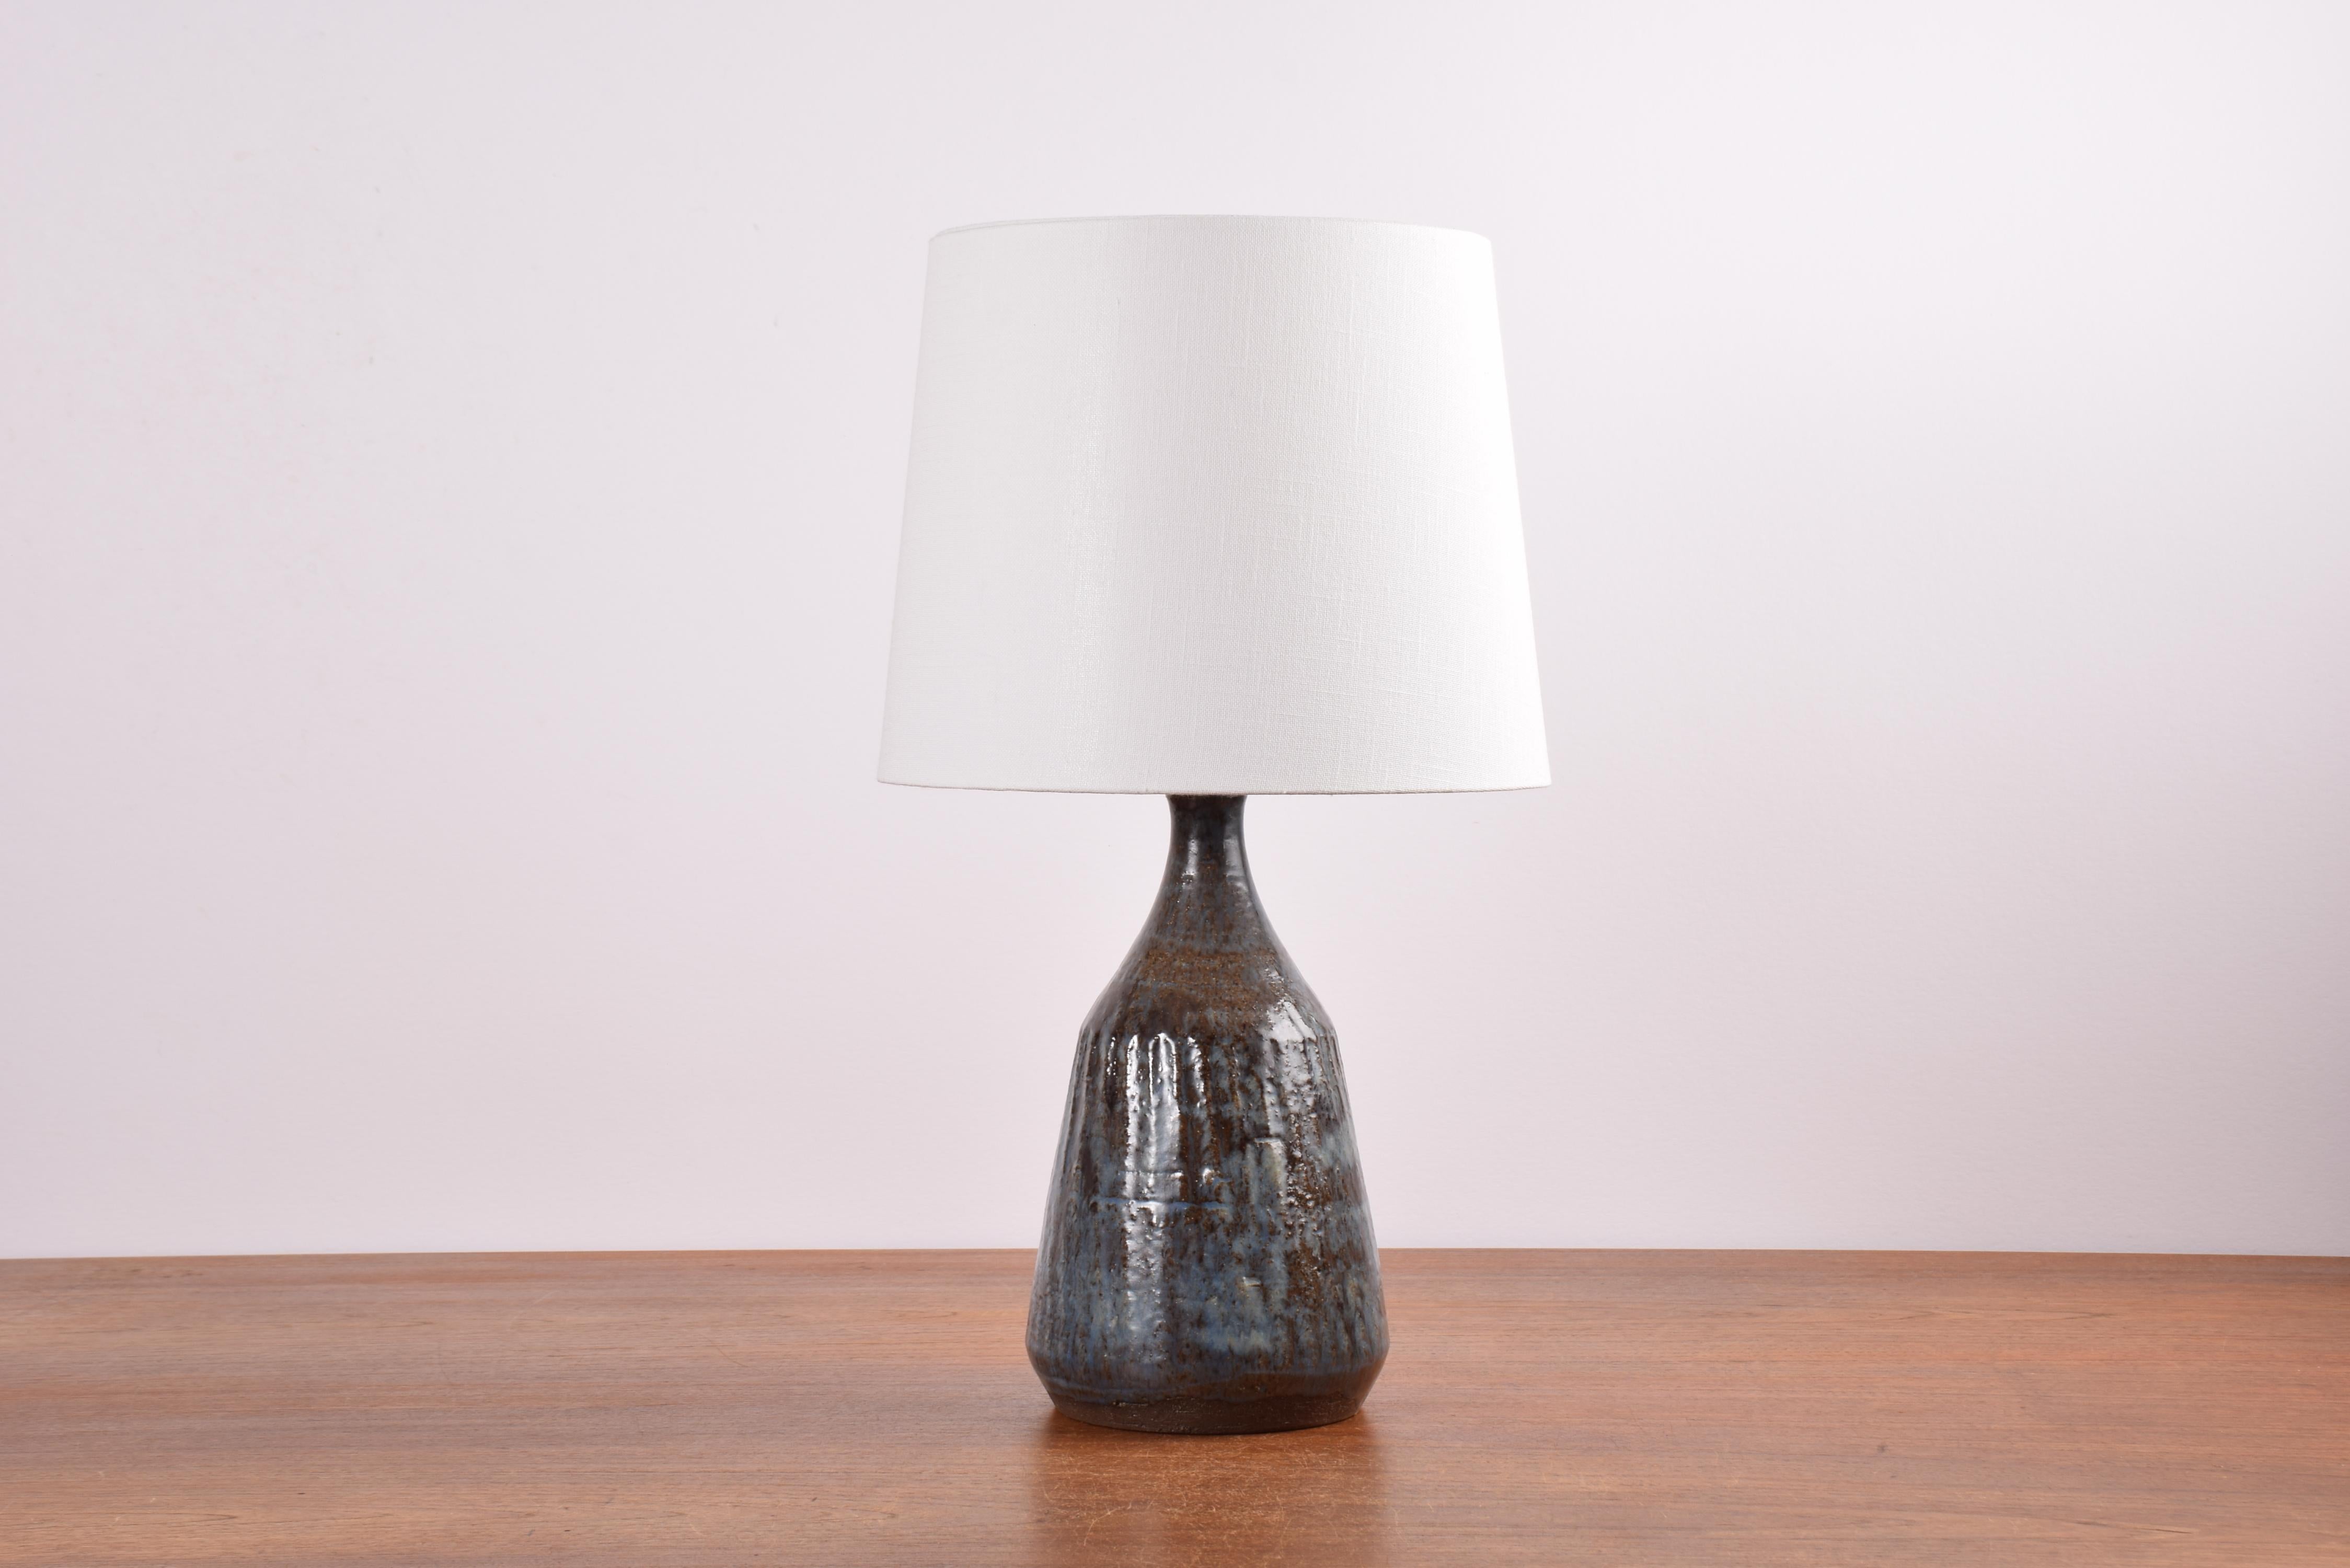 Danish Ceramic Table Lamp Blue and Brown Glaze Bamboo Shade, Modern, 1960s For Sale 7